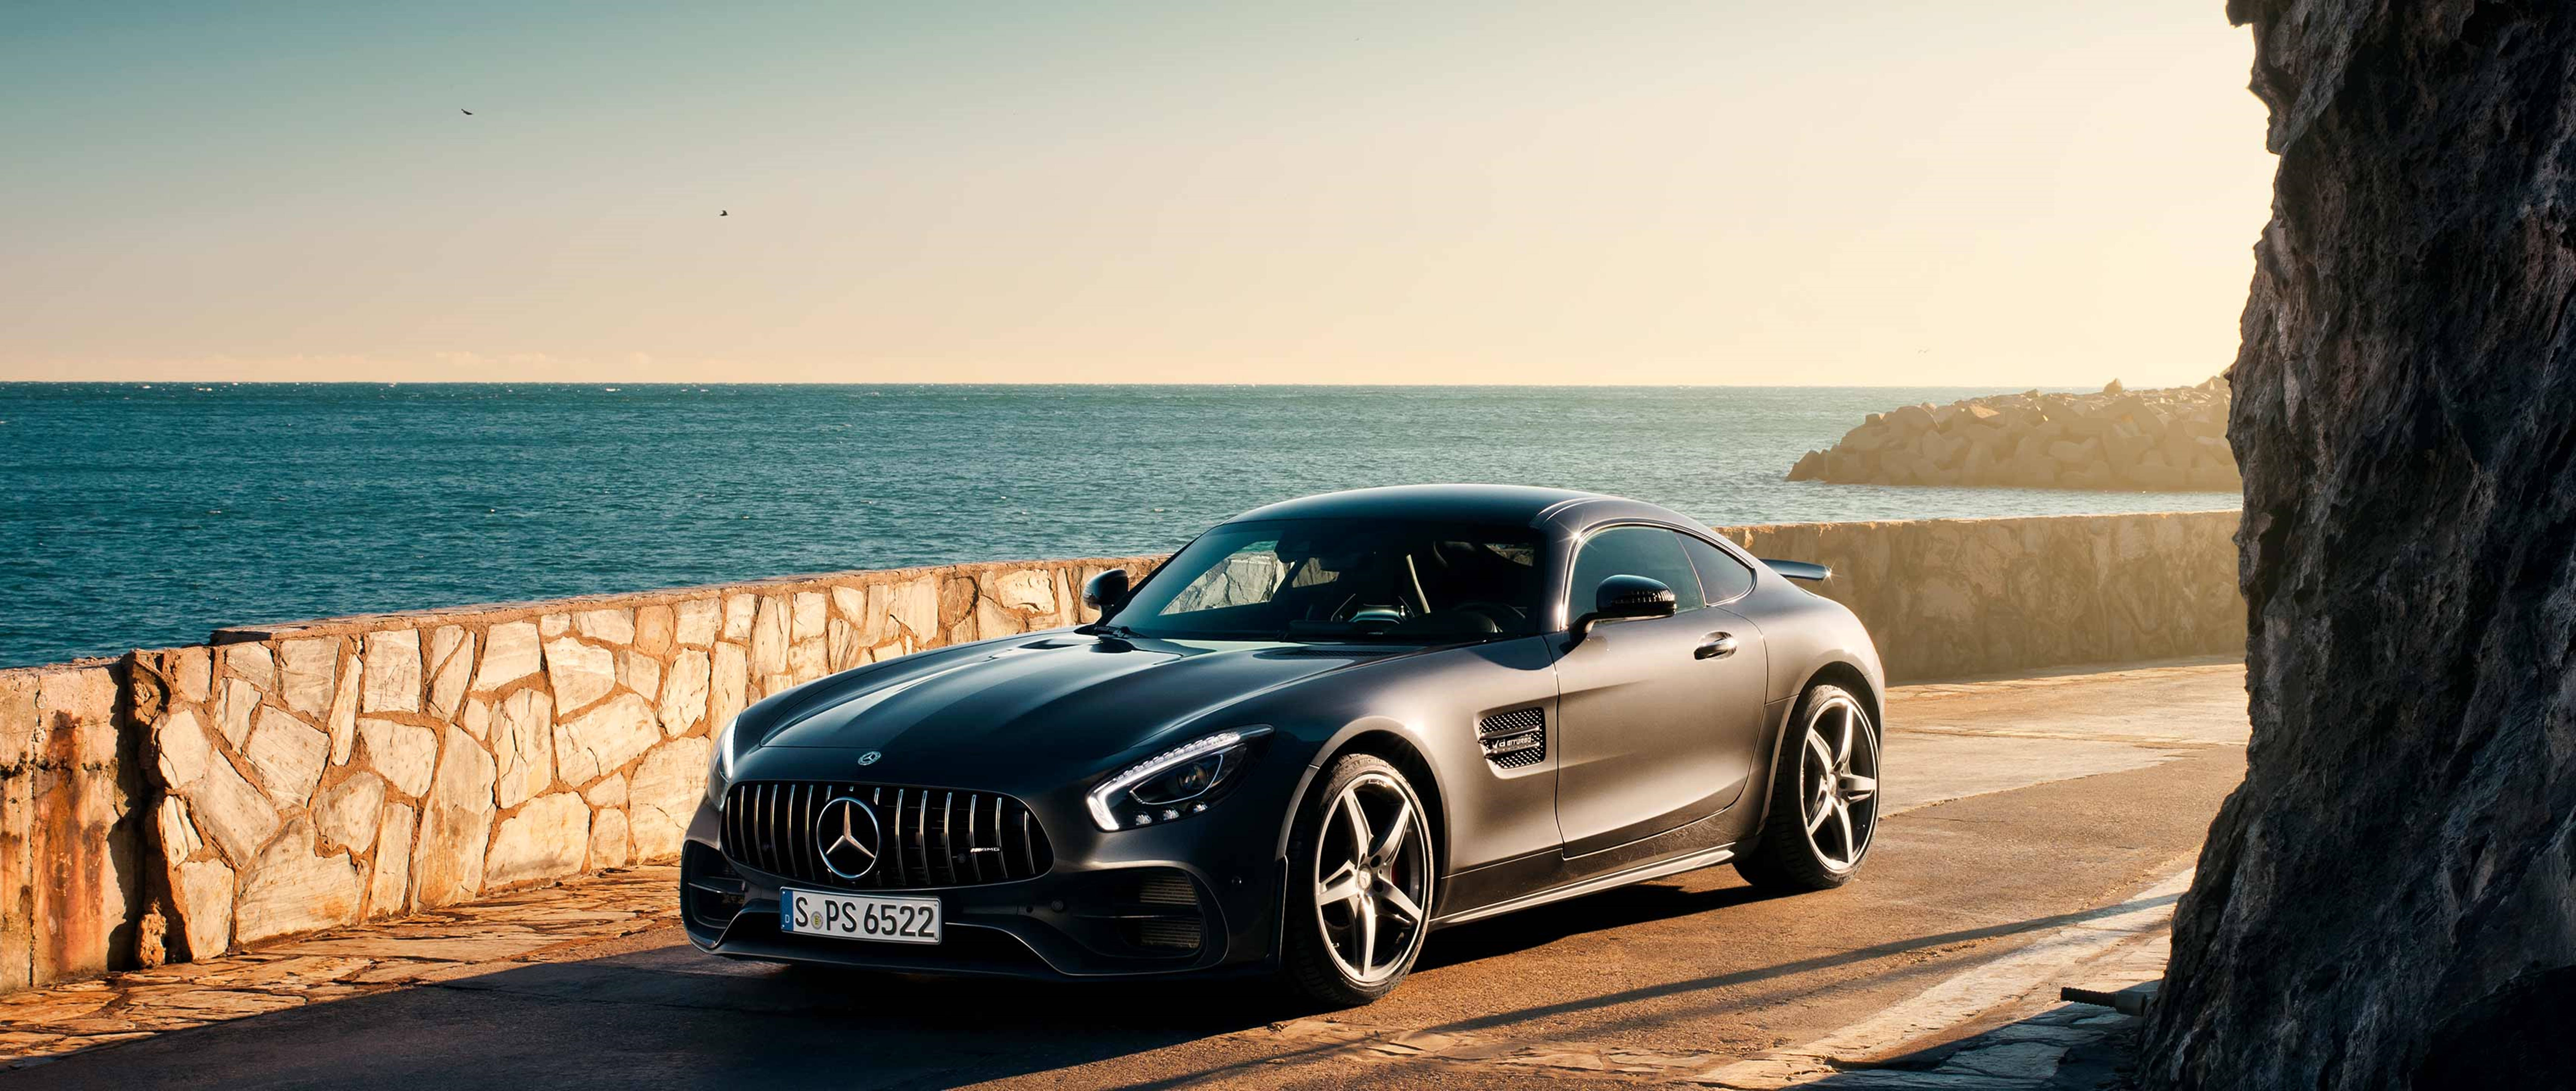 Sharp And Luxurious - Mercedes Amg On Open 4k Road By The Breathtaking Sea Side View. Background